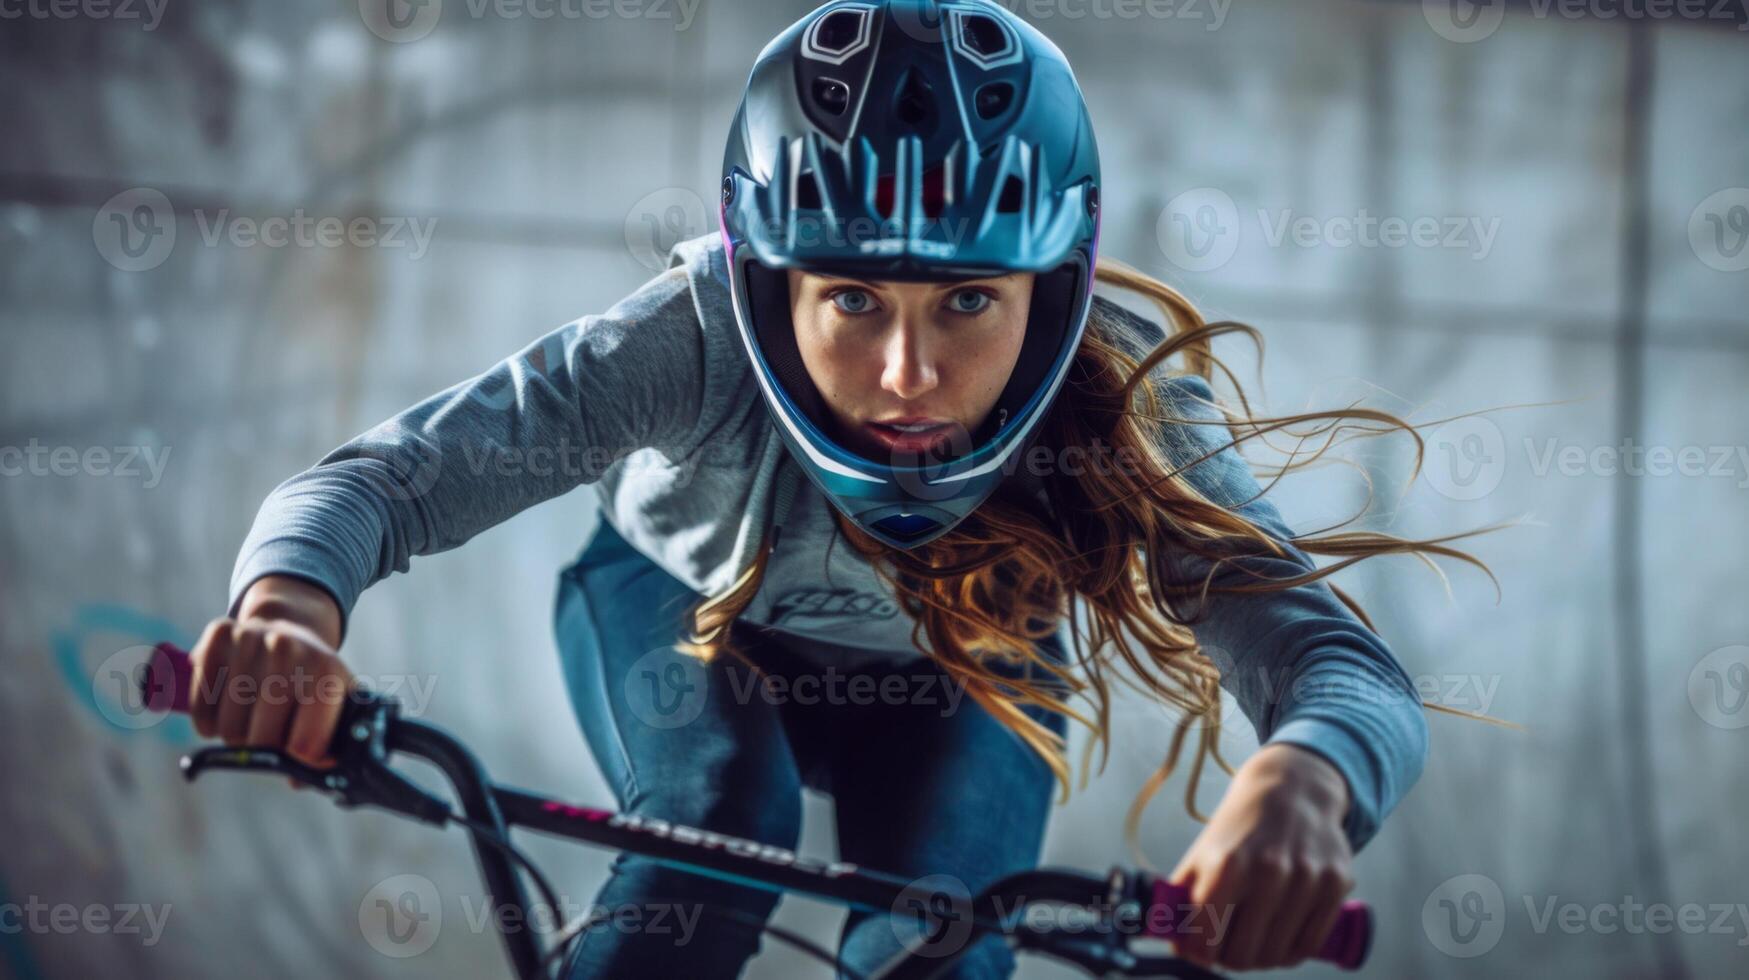 Female BMX cyclist wearing a helmet exhibits intense concentration and action during an urban extreme sport session photo